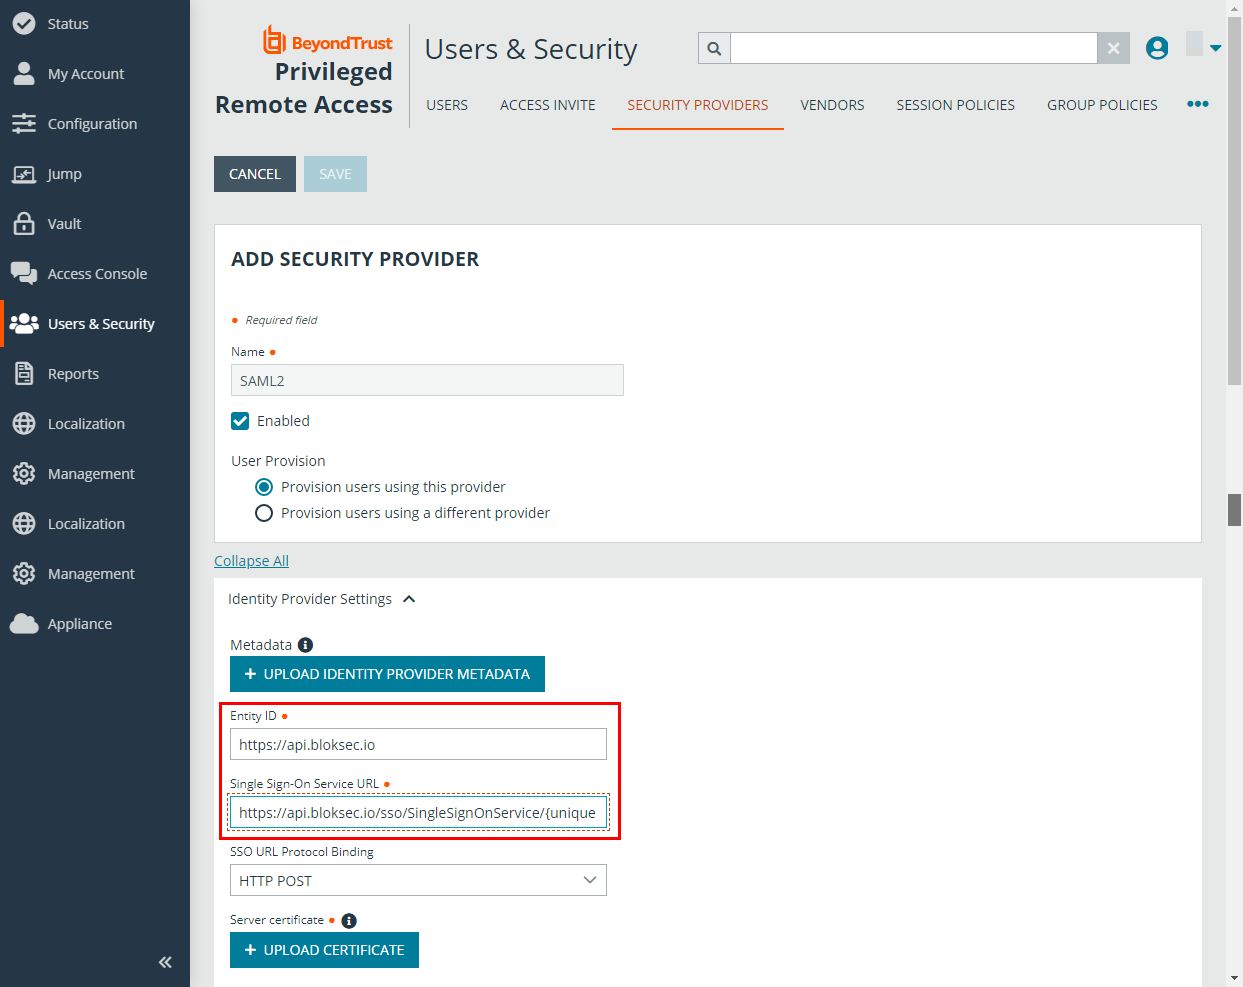 Set the values for Entity ID and Single Sign-On Service URL in Identity Provider Settings